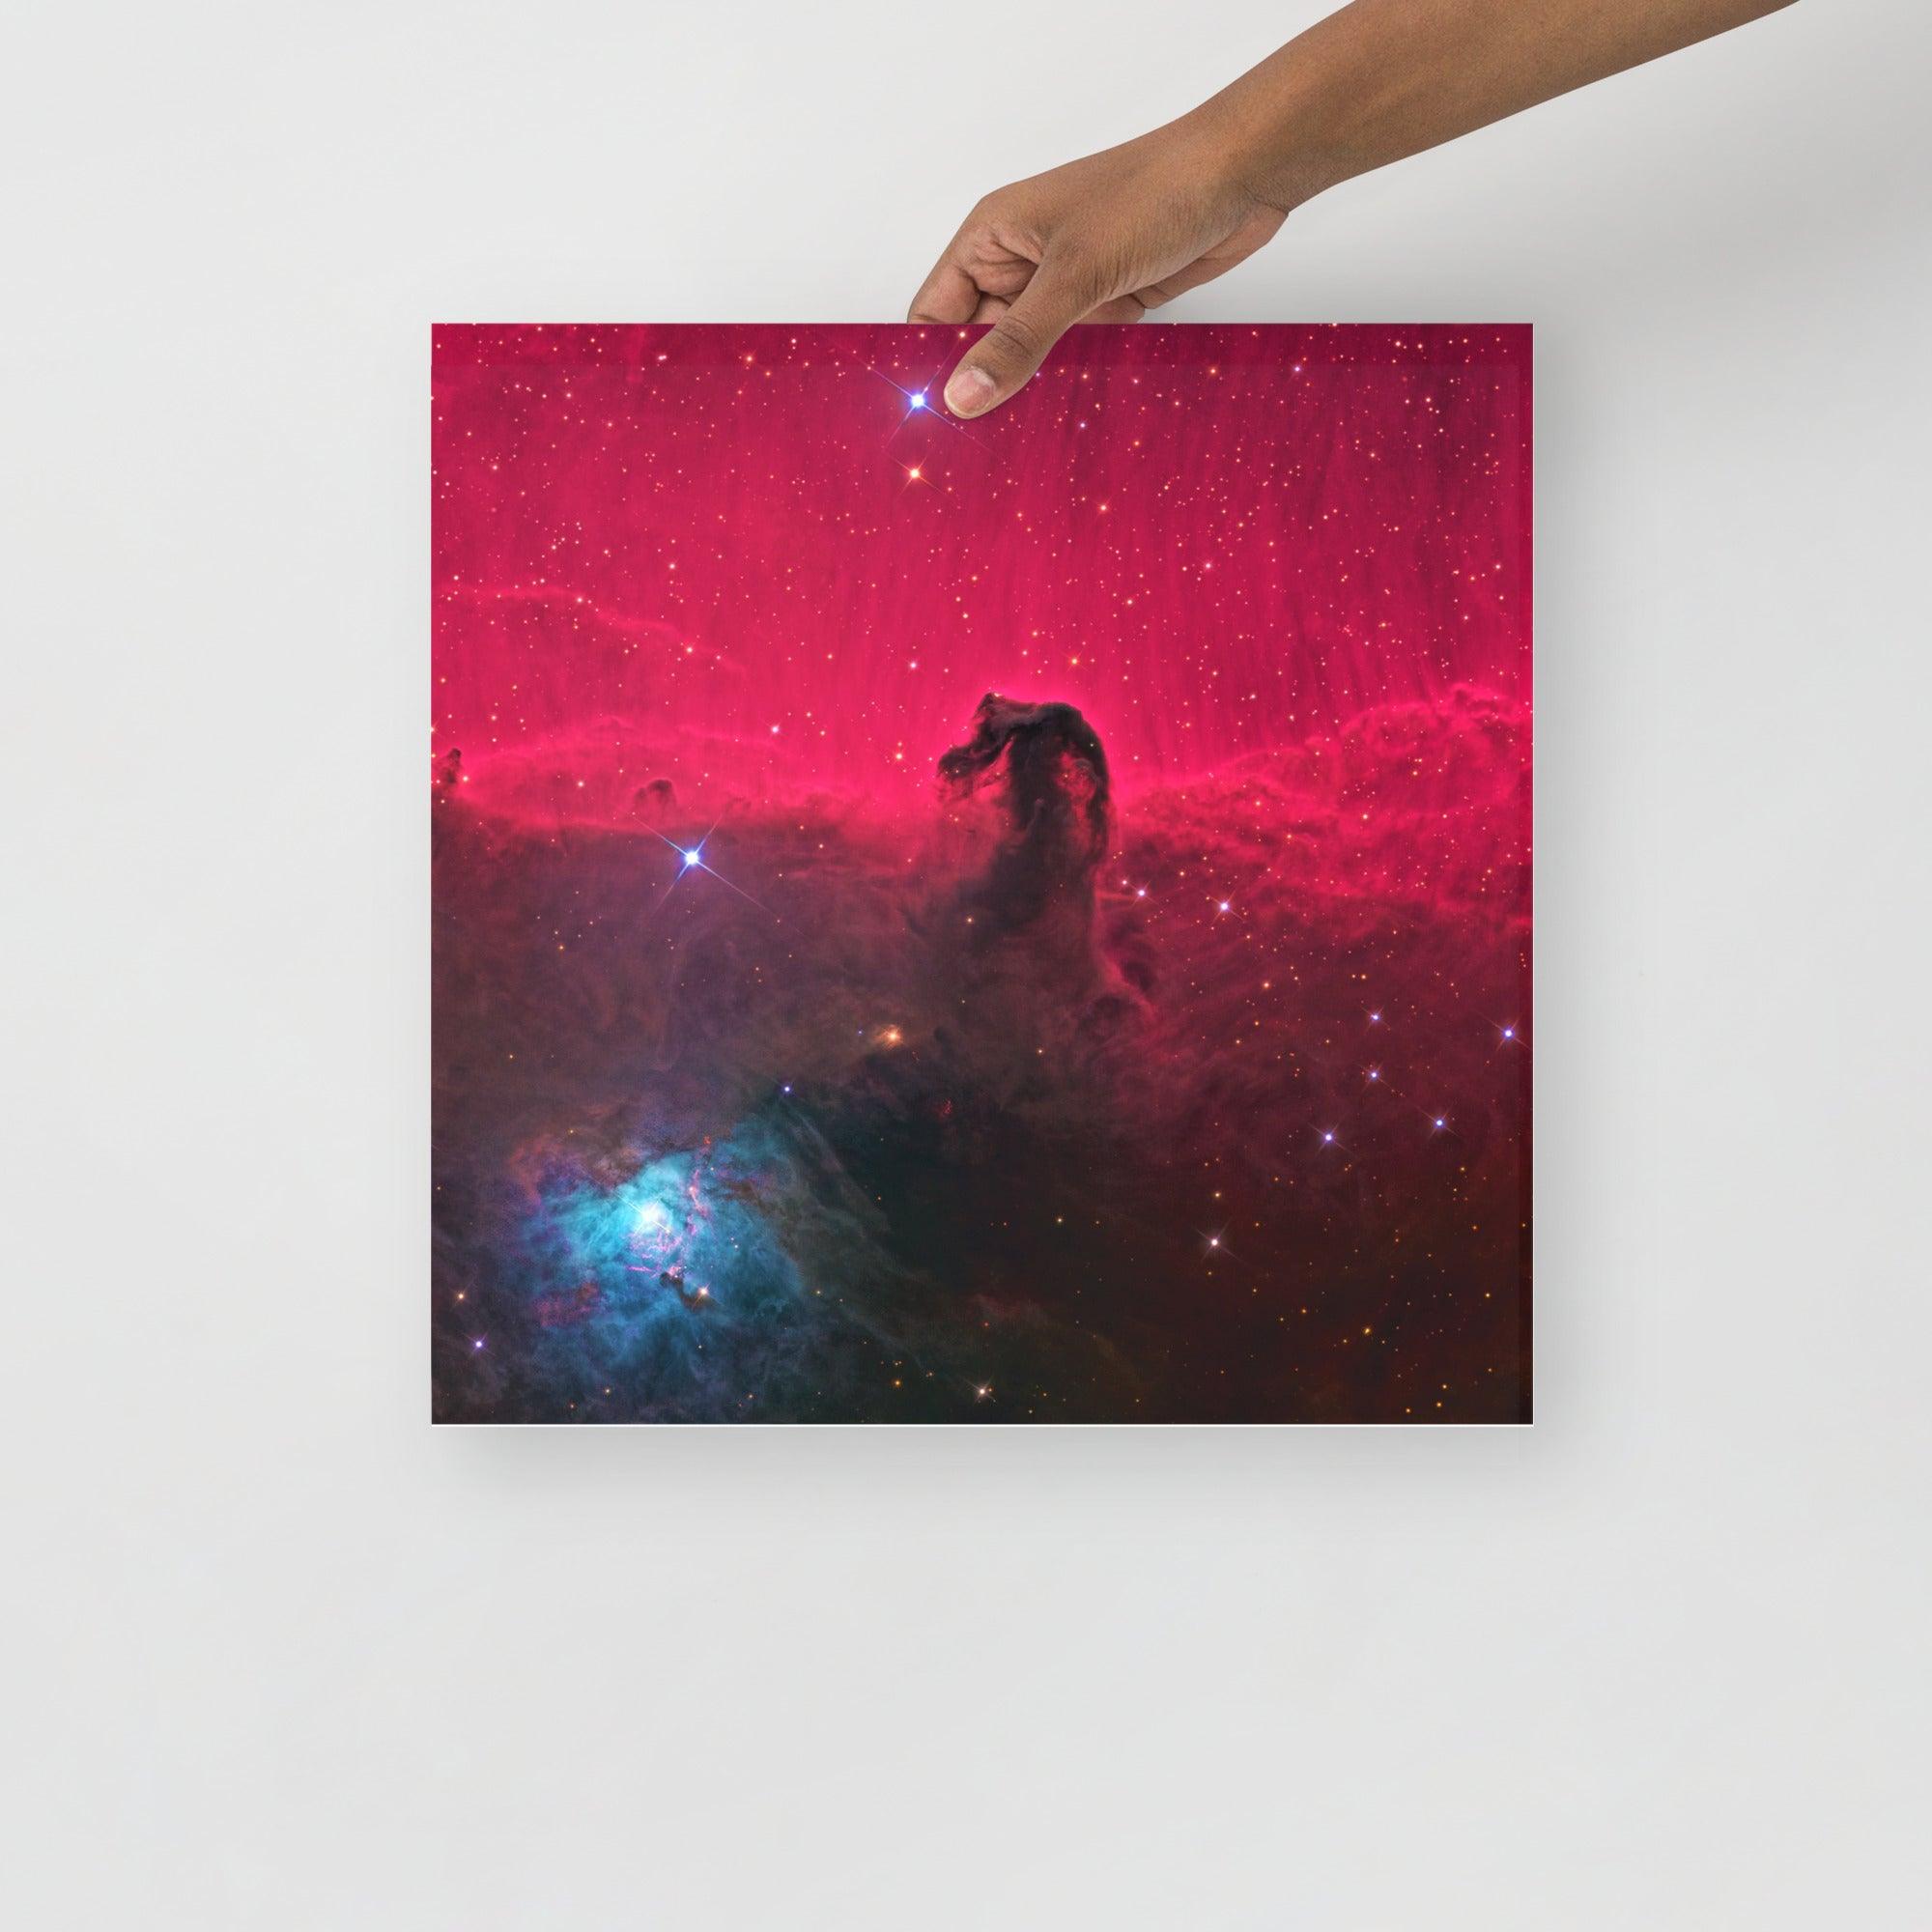 A Horsehead Nebula poster on a plain backdrop in size 16x16”.